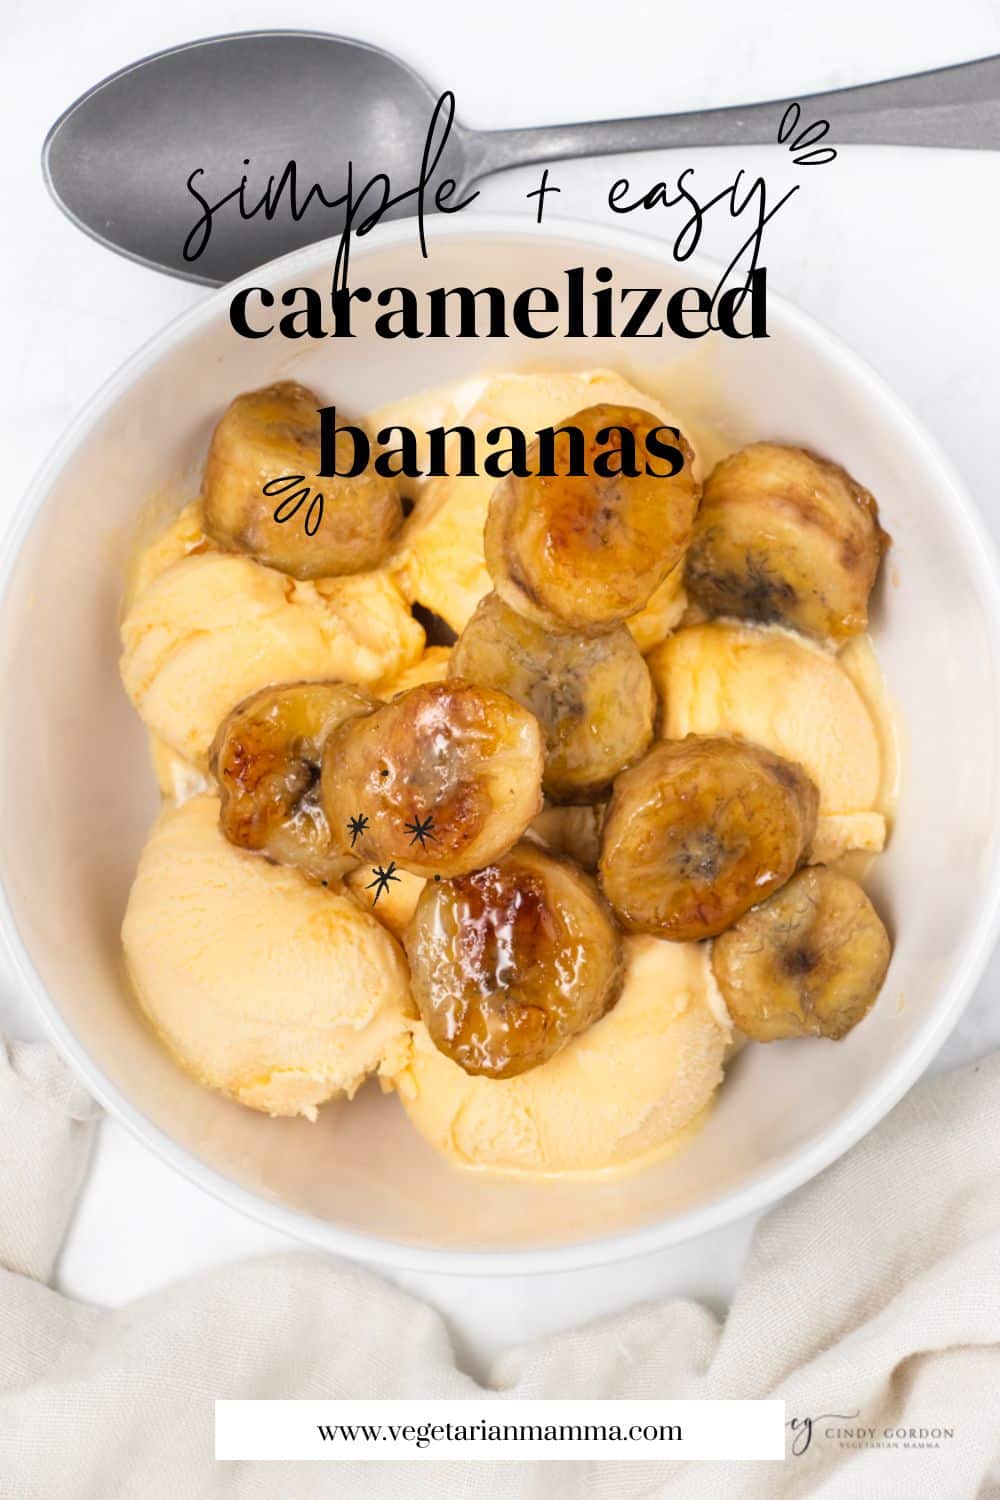 Sweet, buttery, and soft, Caramelized Bananas are the best ice cream topping, and delicious with other desserts and breakfast foods too! Learn how simple it is to caramelize bananas with just two other ingredients and a few minutes of cooking time.